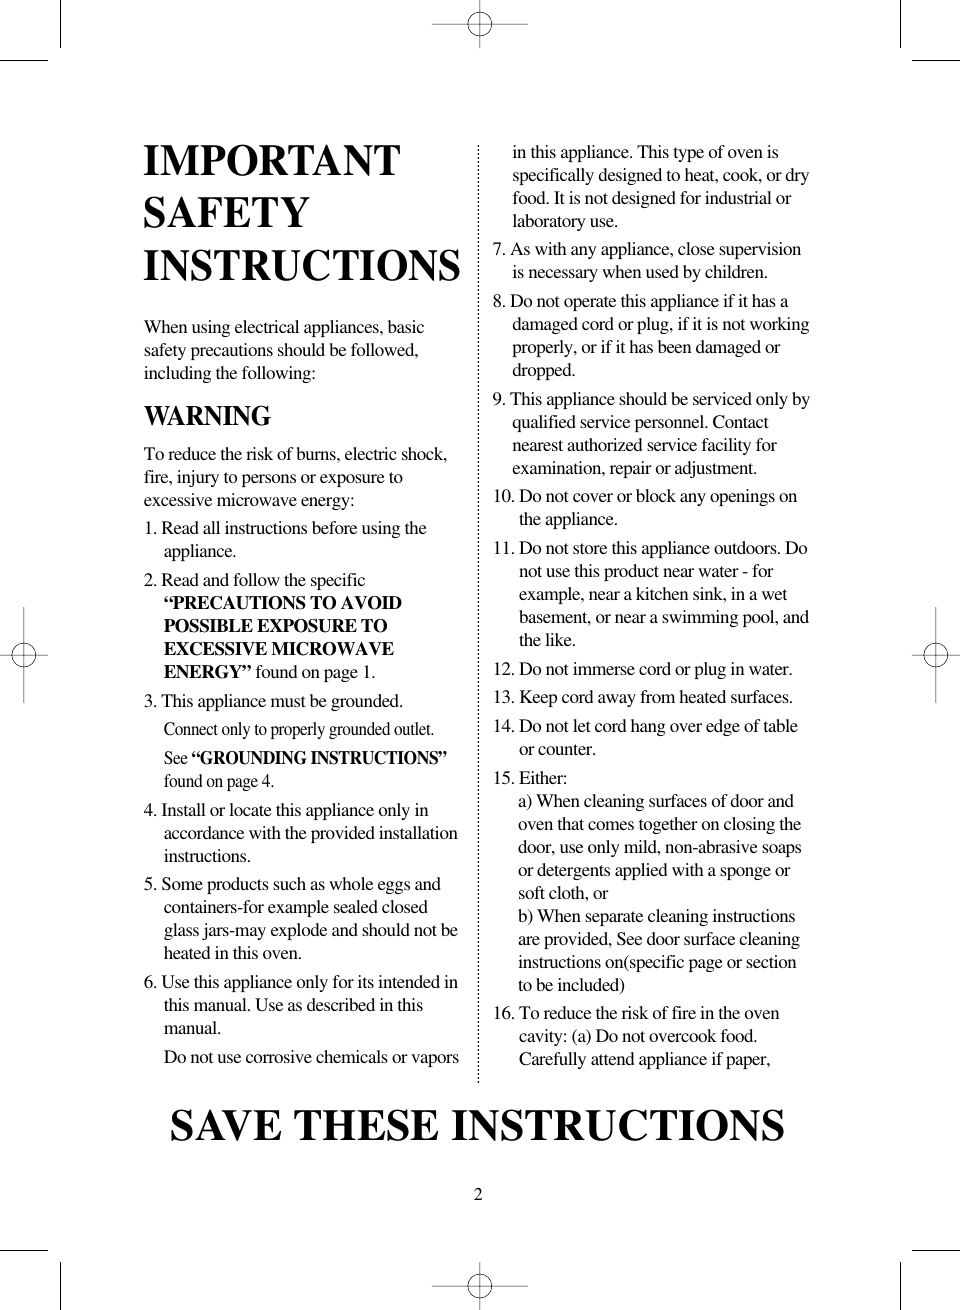 2When using electrical appliances, basicsafety precautions should be followed,including the following:WARNINGTo reduce the risk of burns, electric shock,fire, injury to persons or exposure toexcessive microwave energy:1. Read all instructions before using theappliance.2. Read and follow the specific“PRECAUTIONS TO AVOIDPOSSIBLE EXPOSURE TOEXCESSIVE MICROWAVEENERGY” found on page 1.3. This appliance must be grounded.Connect only to properly grounded outlet.See “GROUNDING INSTRUCTIONS”found on page 4.4. Install or locate this appliance only inaccordance with the provided installationinstructions.5. Some products such as whole eggs andcontainers-for example sealed closedglass jars-may explode and should not beheated in this oven.6. Use this appliance only for its intended inthis manual. Use as described in thismanual.Do not use corrosive chemicals or vaporsin this appliance. This type of oven isspecifically designed to heat, cook, or dryfood. It is not designed for industrial orlaboratory use.7. As with any appliance, close supervisionis necessary when used by children.8. Do not operate this appliance if it has adamaged cord or plug, if it is not workingproperly, or if it has been damaged ordropped.9. This appliance should be serviced only byqualified service personnel. Contactnearest authorized service facility forexamination, repair or adjustment.10. Do not cover or block any openings onthe appliance.11. Do not store this appliance outdoors. Donot use this product near water - forexample, near a kitchen sink, in a wetbasement, or near a swimming pool, andthe like.12. Do not immerse cord or plug in water.13. Keep cord away from heated surfaces.14. Do not let cord hang over edge of tableor counter.15. Either:a) When cleaning surfaces of door andoven that comes together on closing thedoor, use only mild, non-abrasive soapsor detergents applied with a sponge orsoft cloth, orb) When separate cleaning instructionsare provided, See door surface cleaninginstructions on(specific page or sectionto be included)16. To reduce the risk of fire in the ovencavity: (a) Do not overcook food.Carefully attend appliance if paper, IMPORTANTSAFETYINSTRUCTIONSSAVE THESE INSTRUCTIONS 